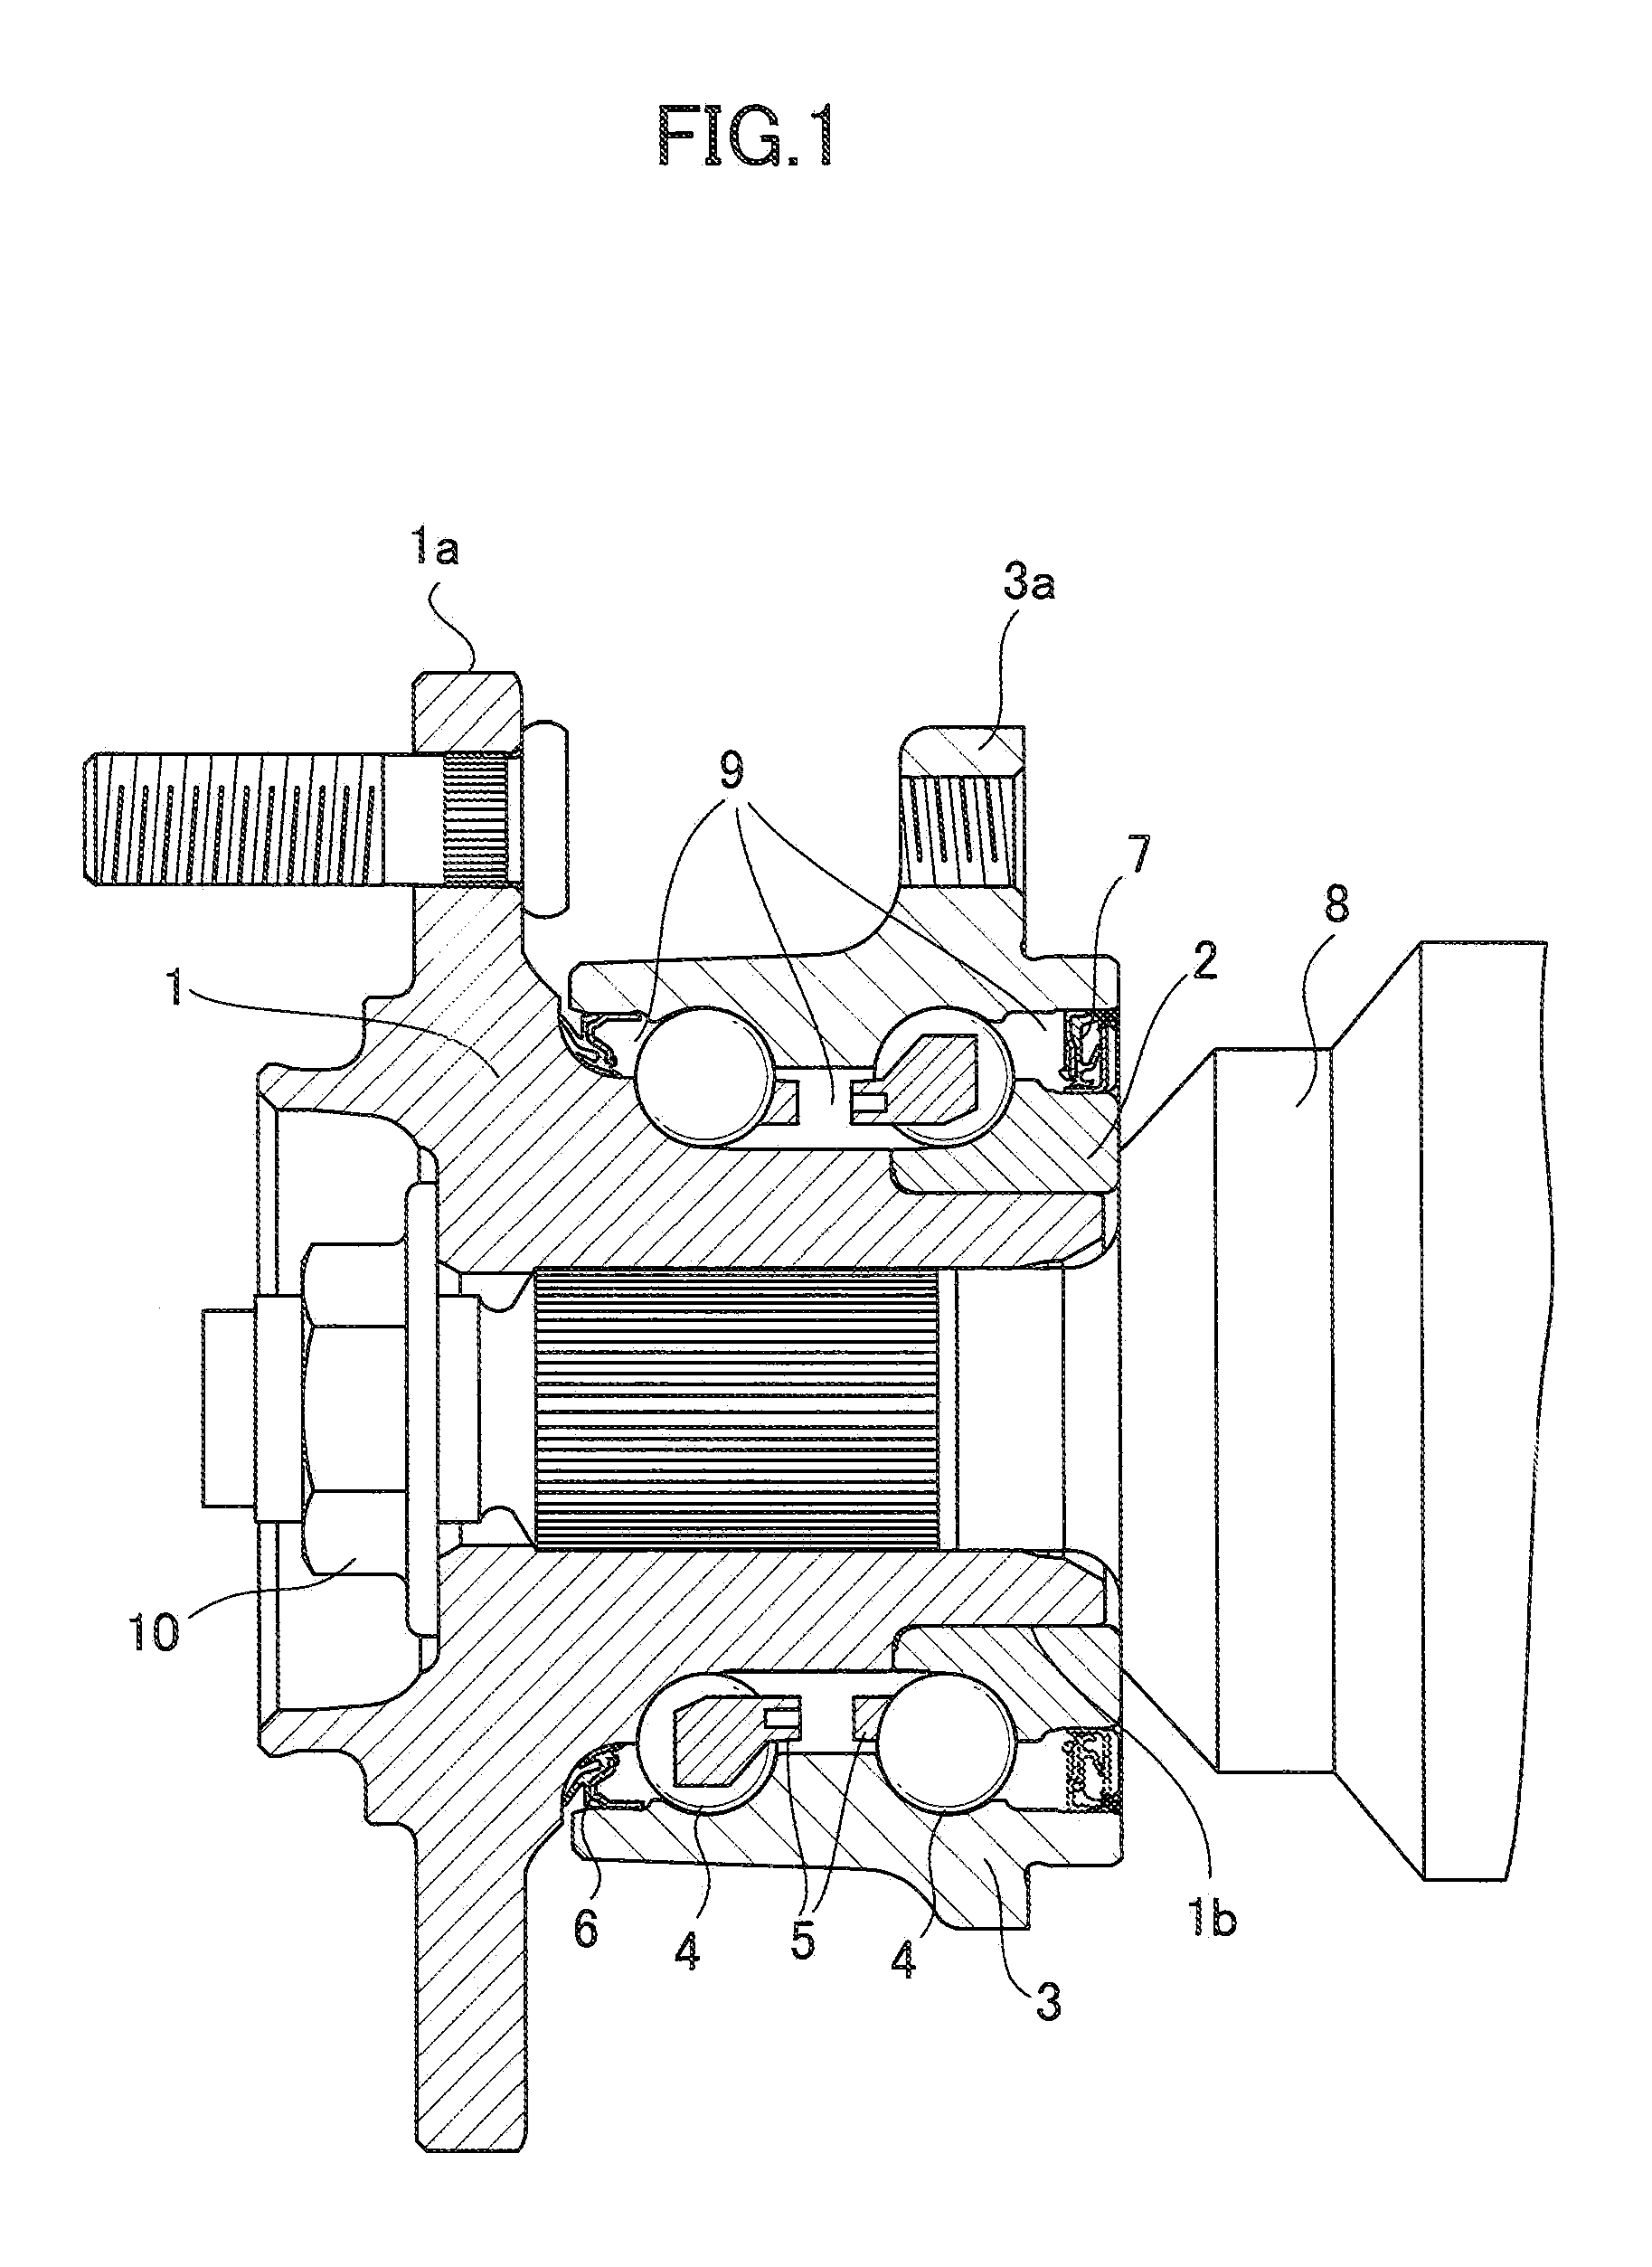 Grease composition for hub unit bearing